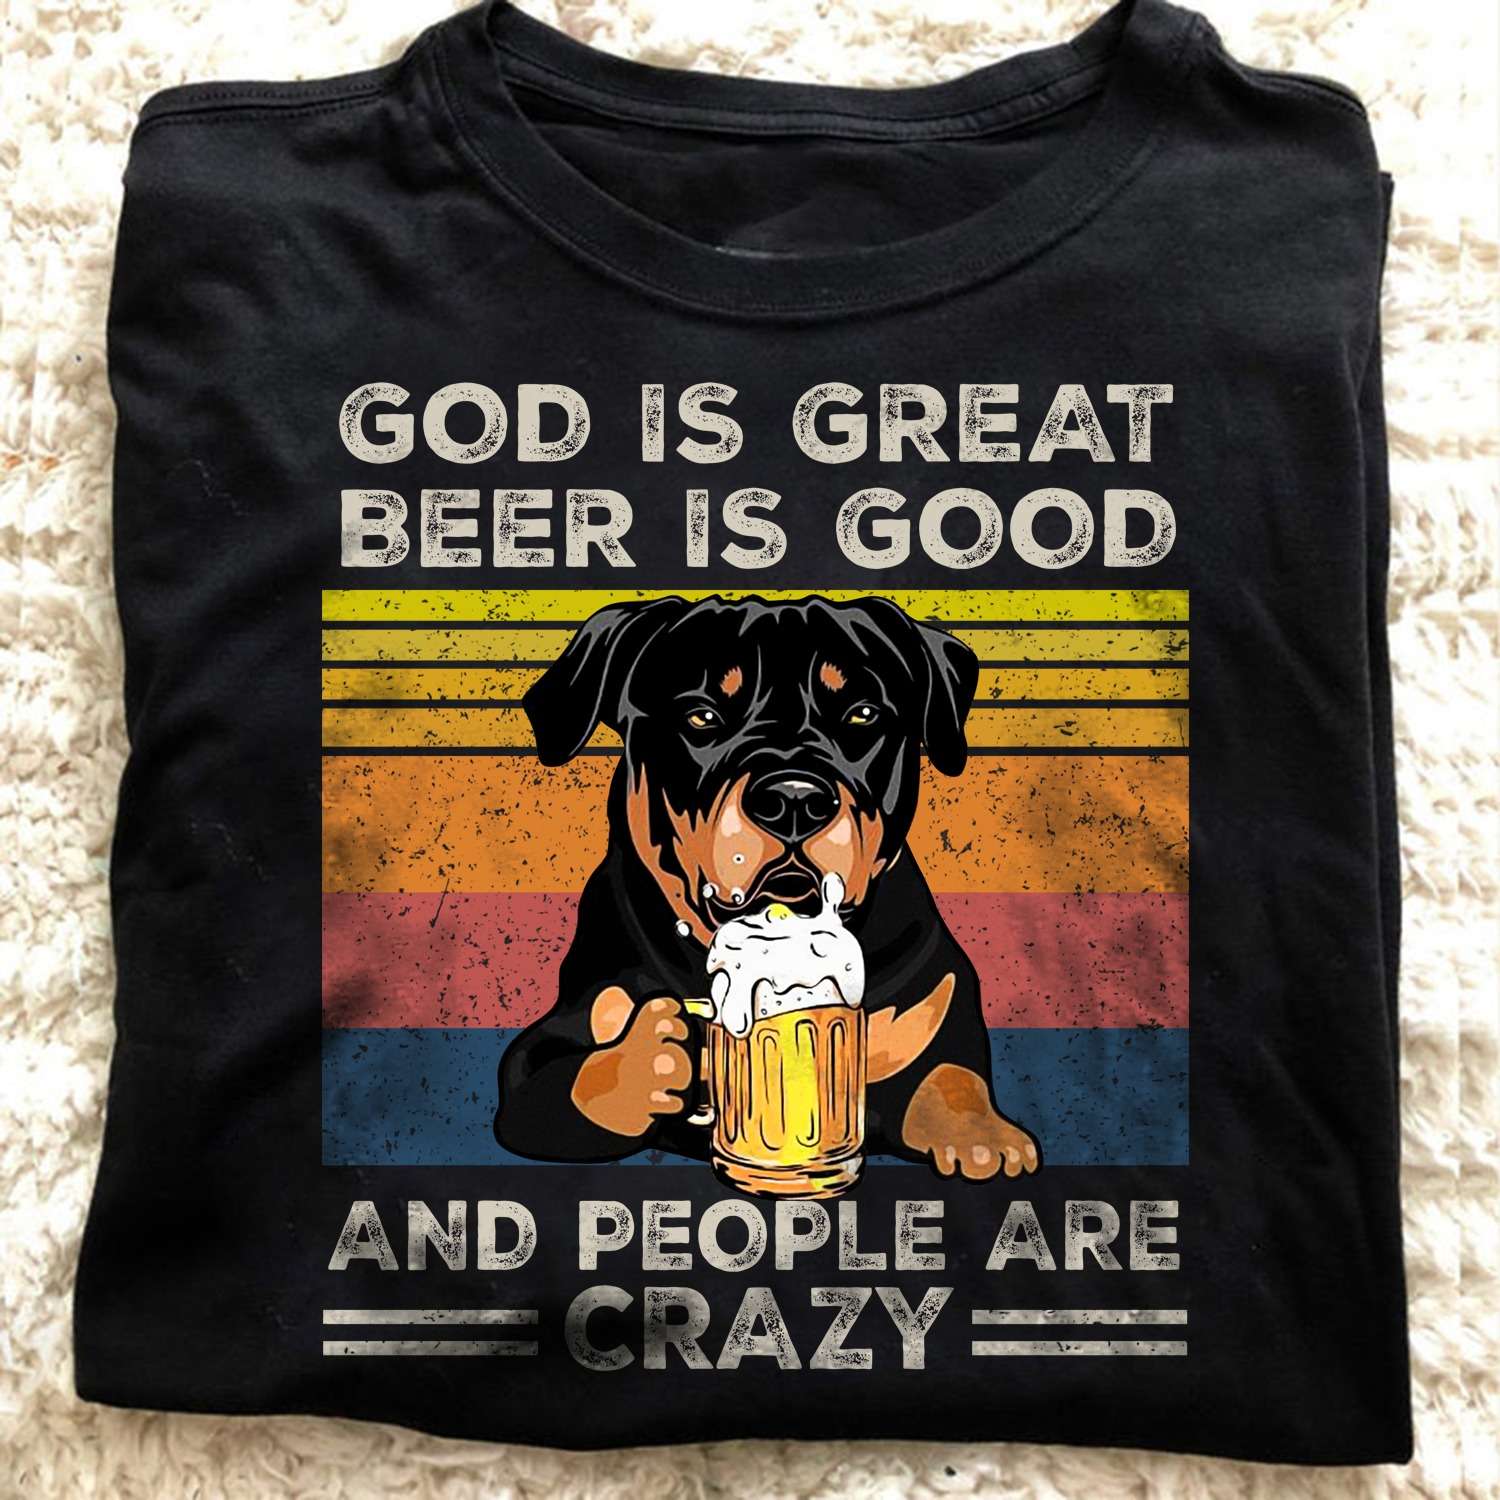 God is great beer is good and people are crazy - Rottweiler and beer, Rottweiler dog